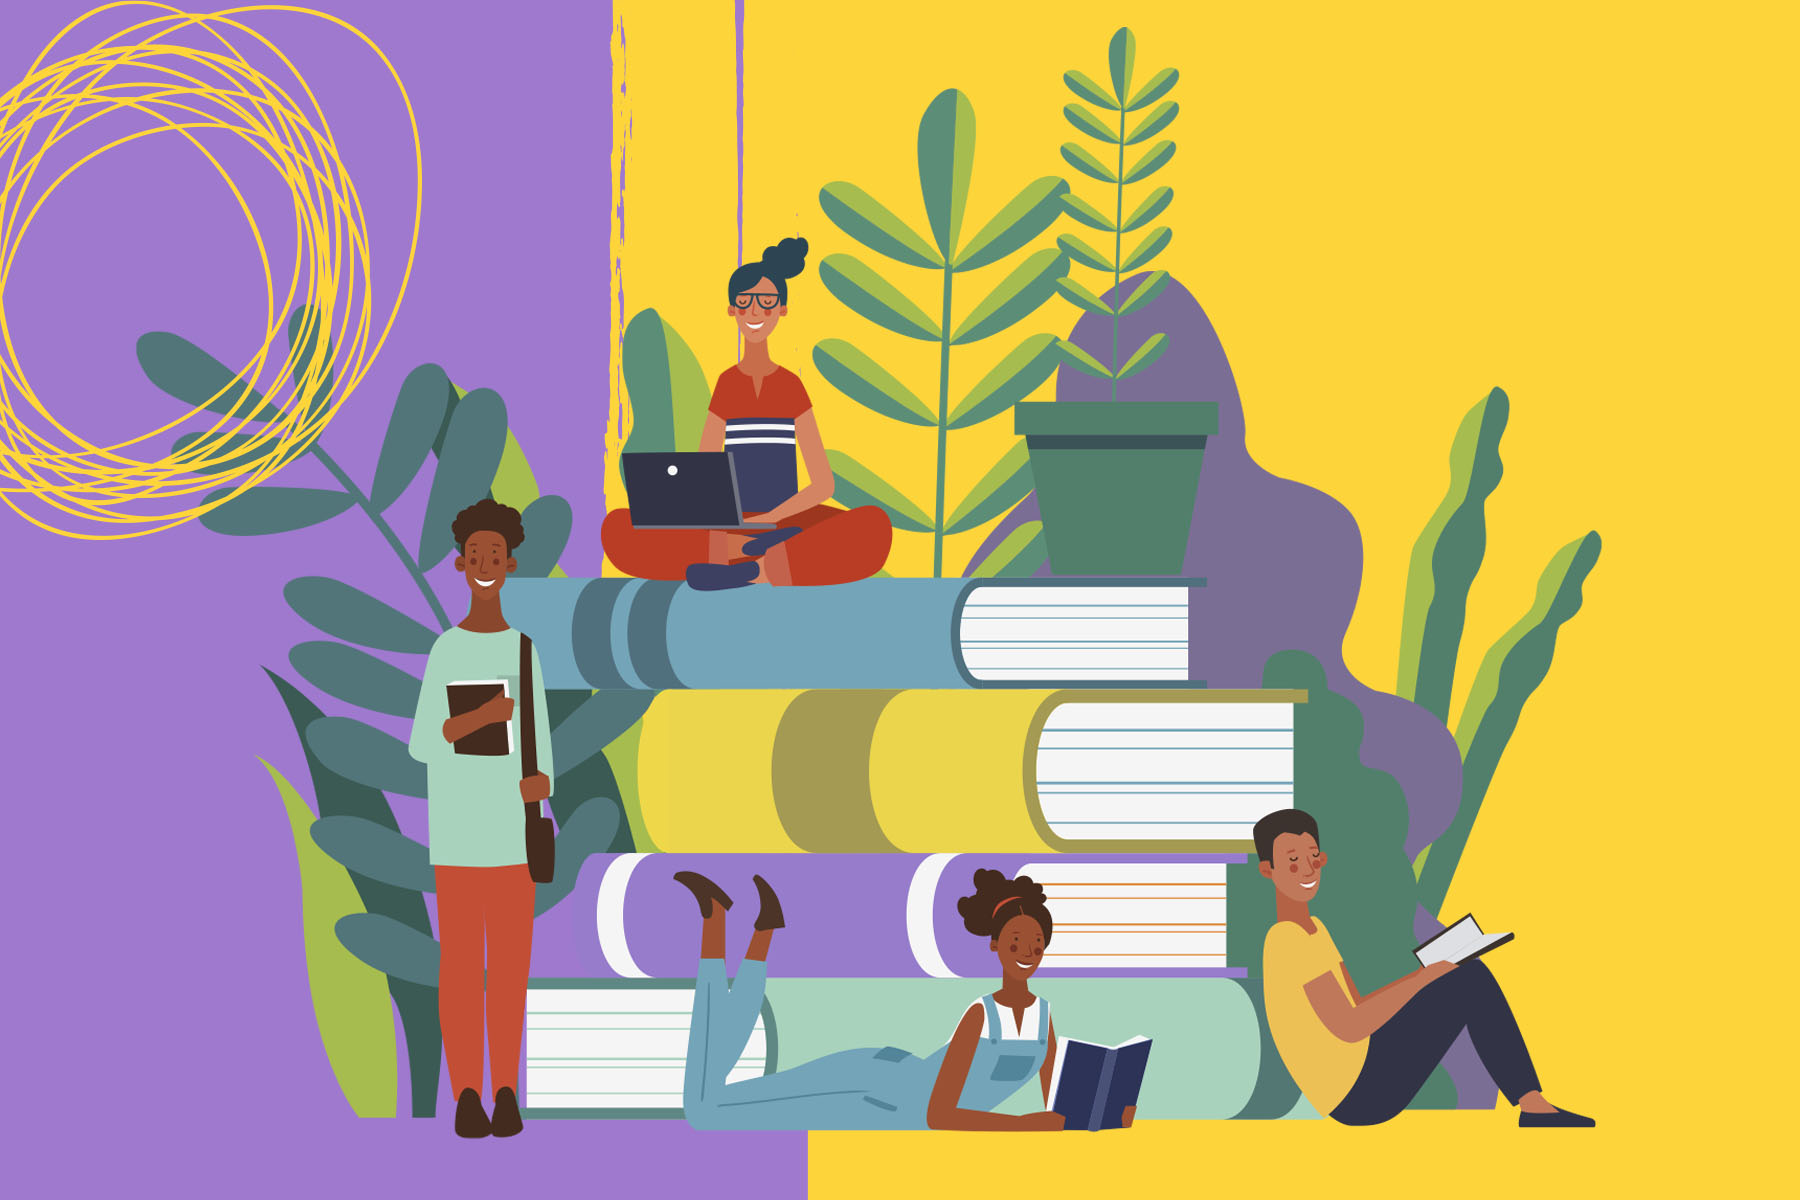 An illustration of people sitting on a stack of oversized books